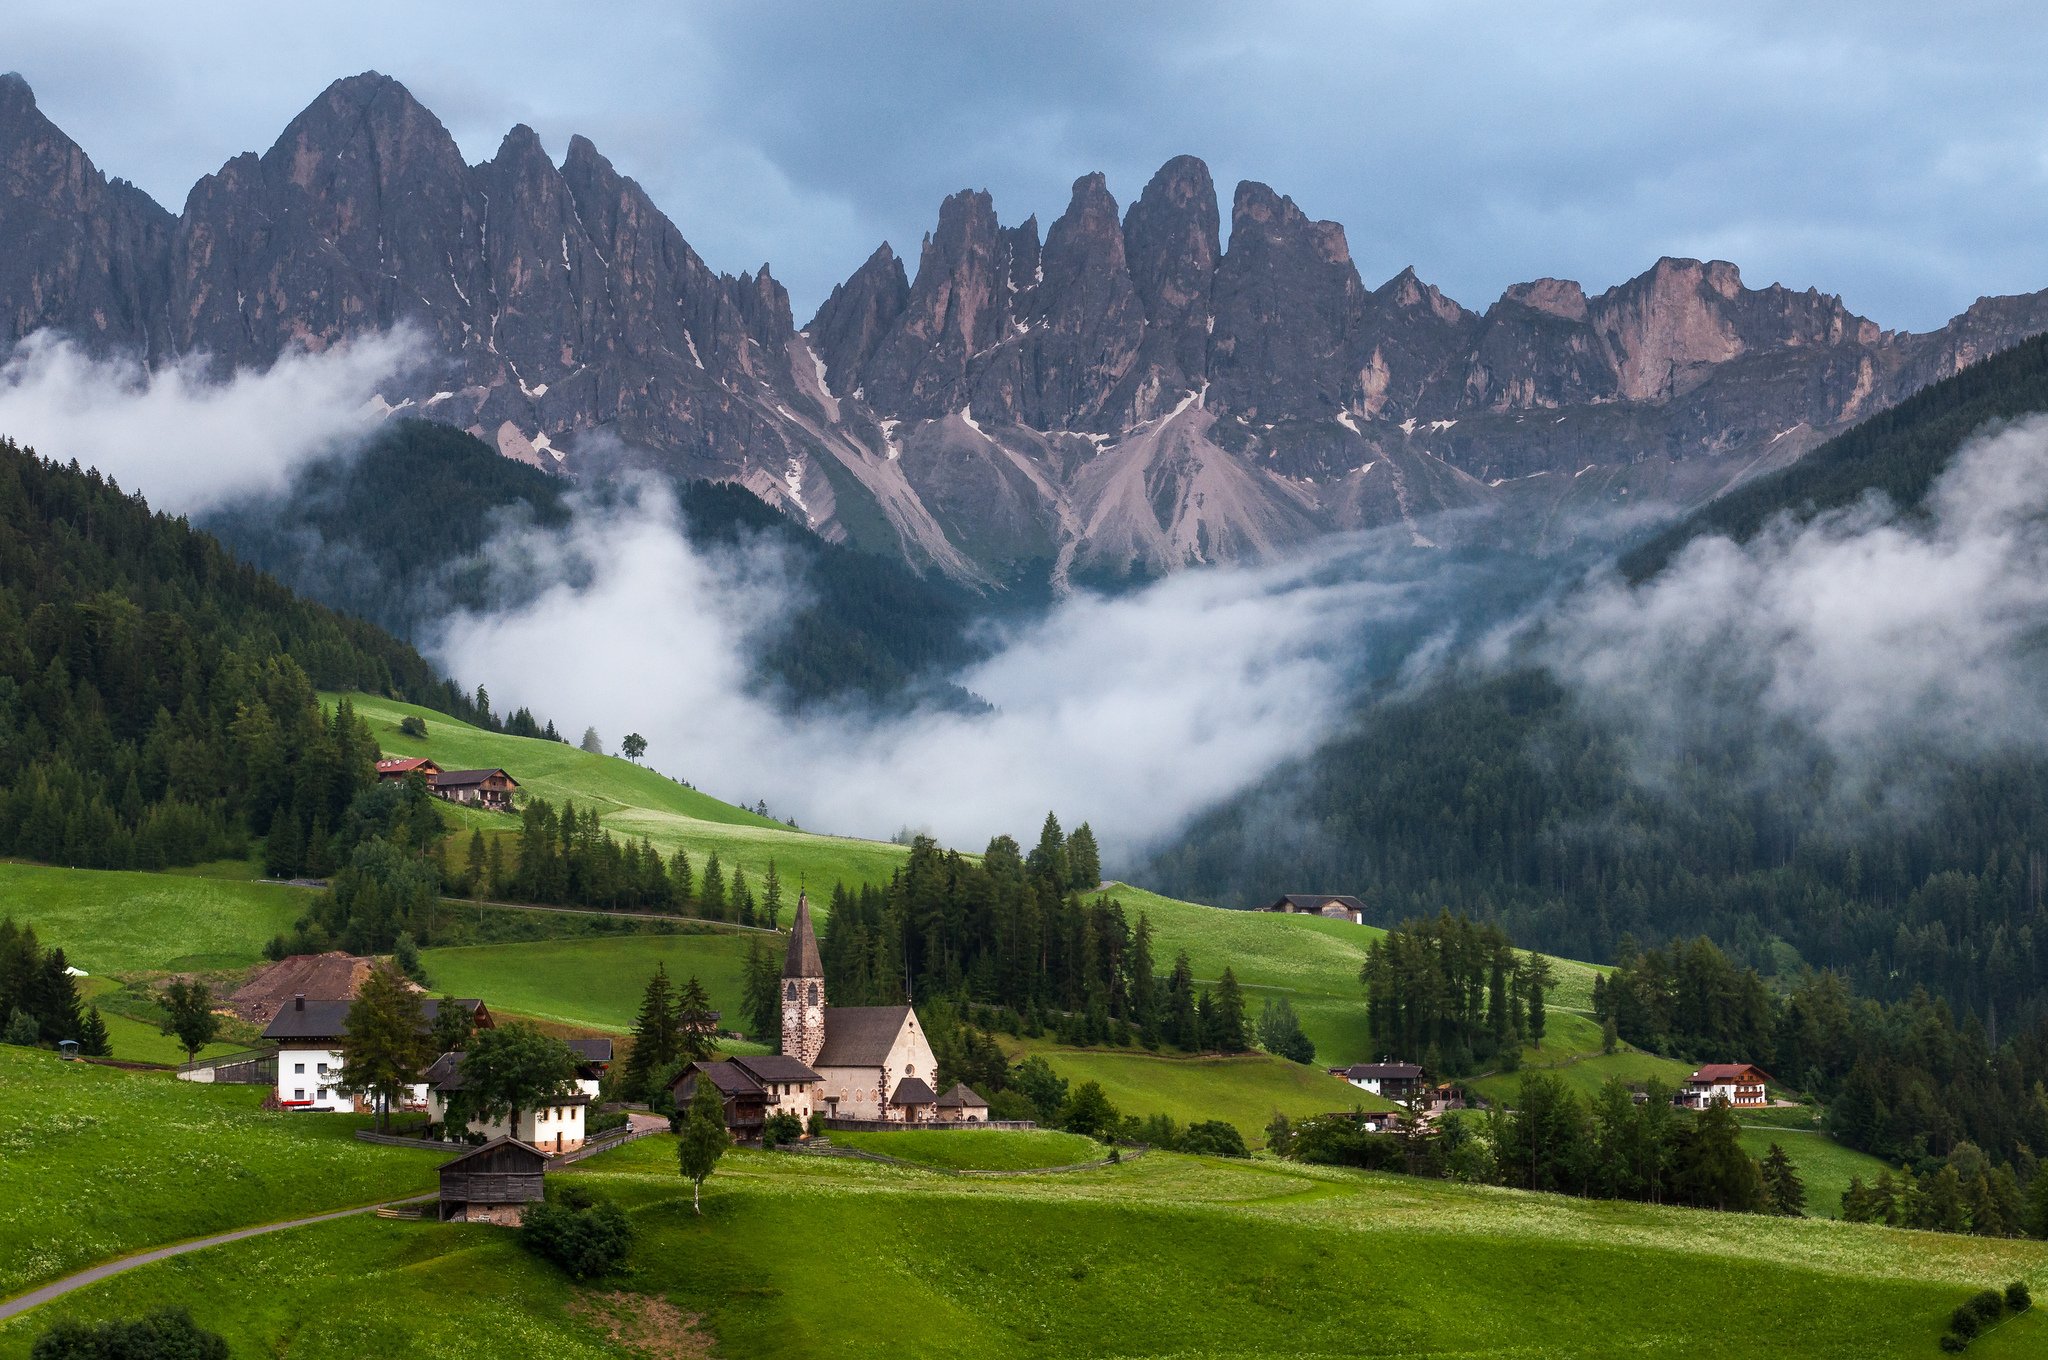 dolomiti, Dolomites, Mountains, Clouds, Forest, Trees, Grass, Church, Home, Nature, Landscape Wallpaper